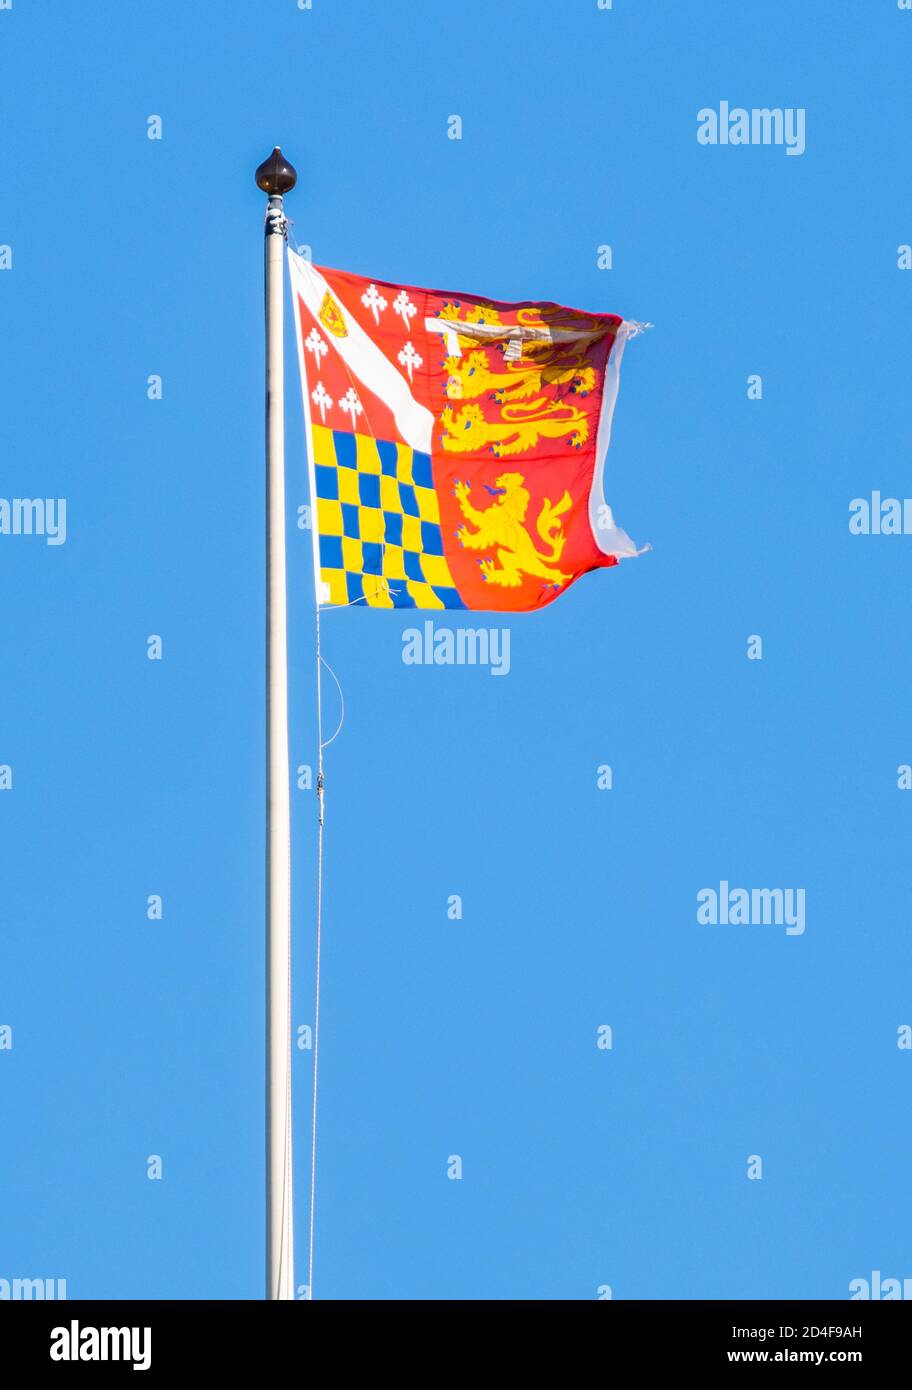 Flag showing coat of arms of the Howard family. Stock Photo